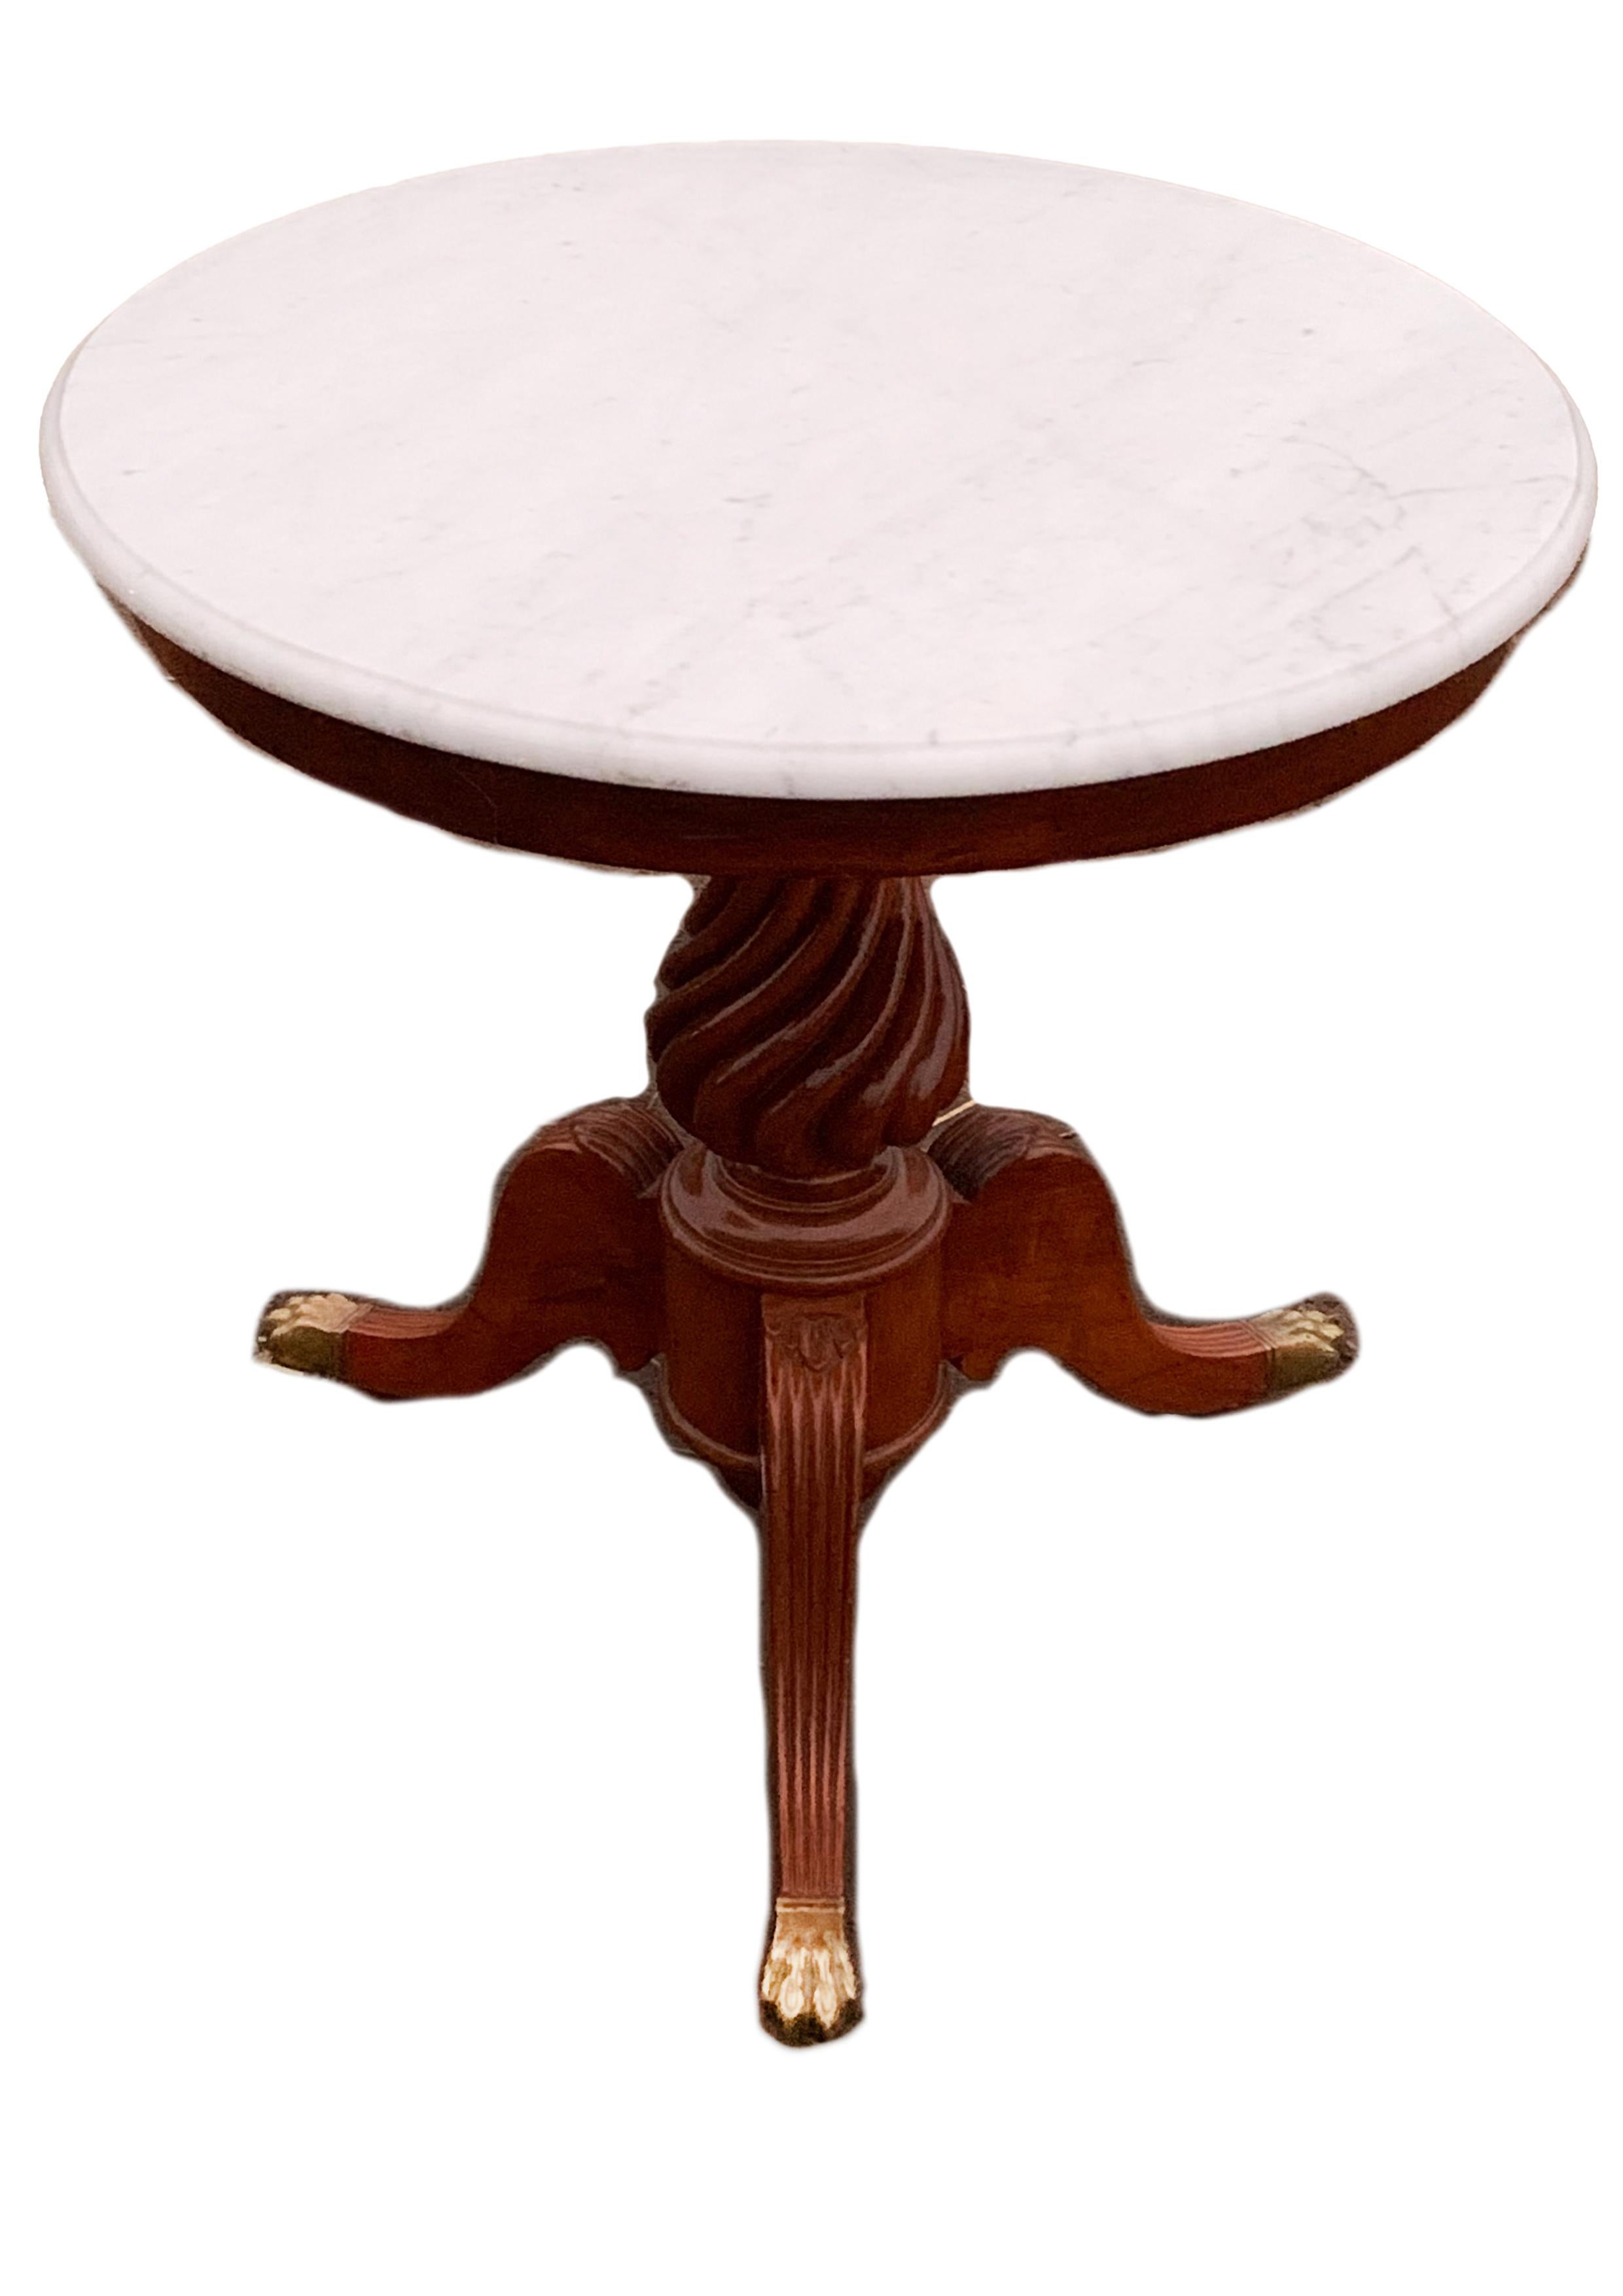 British 19th Century Marble & Mahogany Gueridon Pedestal Table With Turned Wood Column For Sale